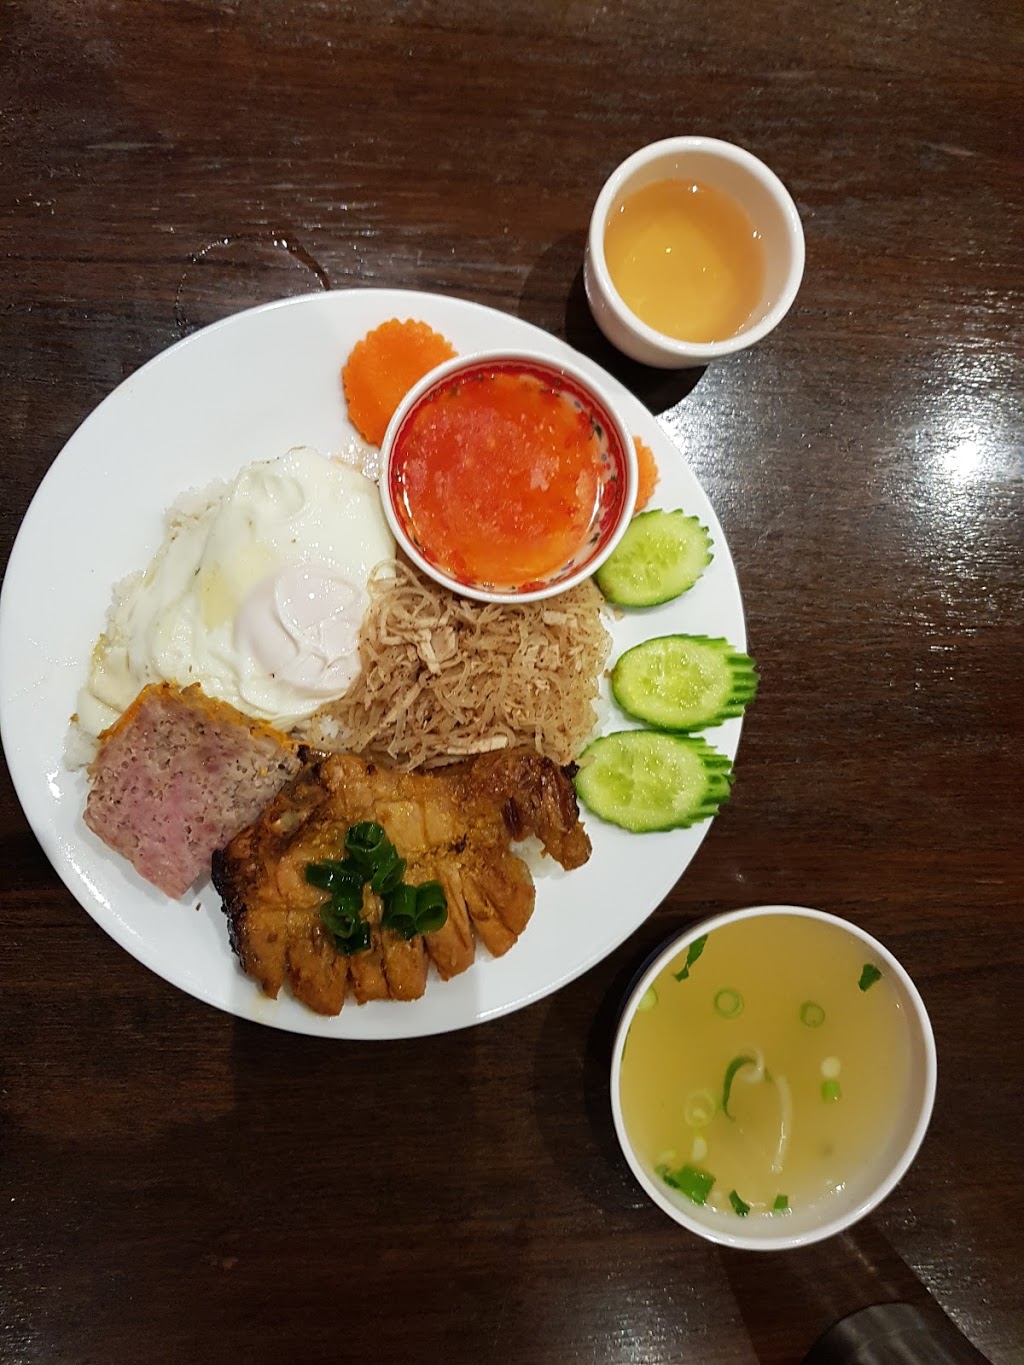 Hien Vuong Pasteur | meal delivery | 144 Hopkins St, Footscray VIC 3011, Australia | 0396879698 OR +61 3 9687 9698